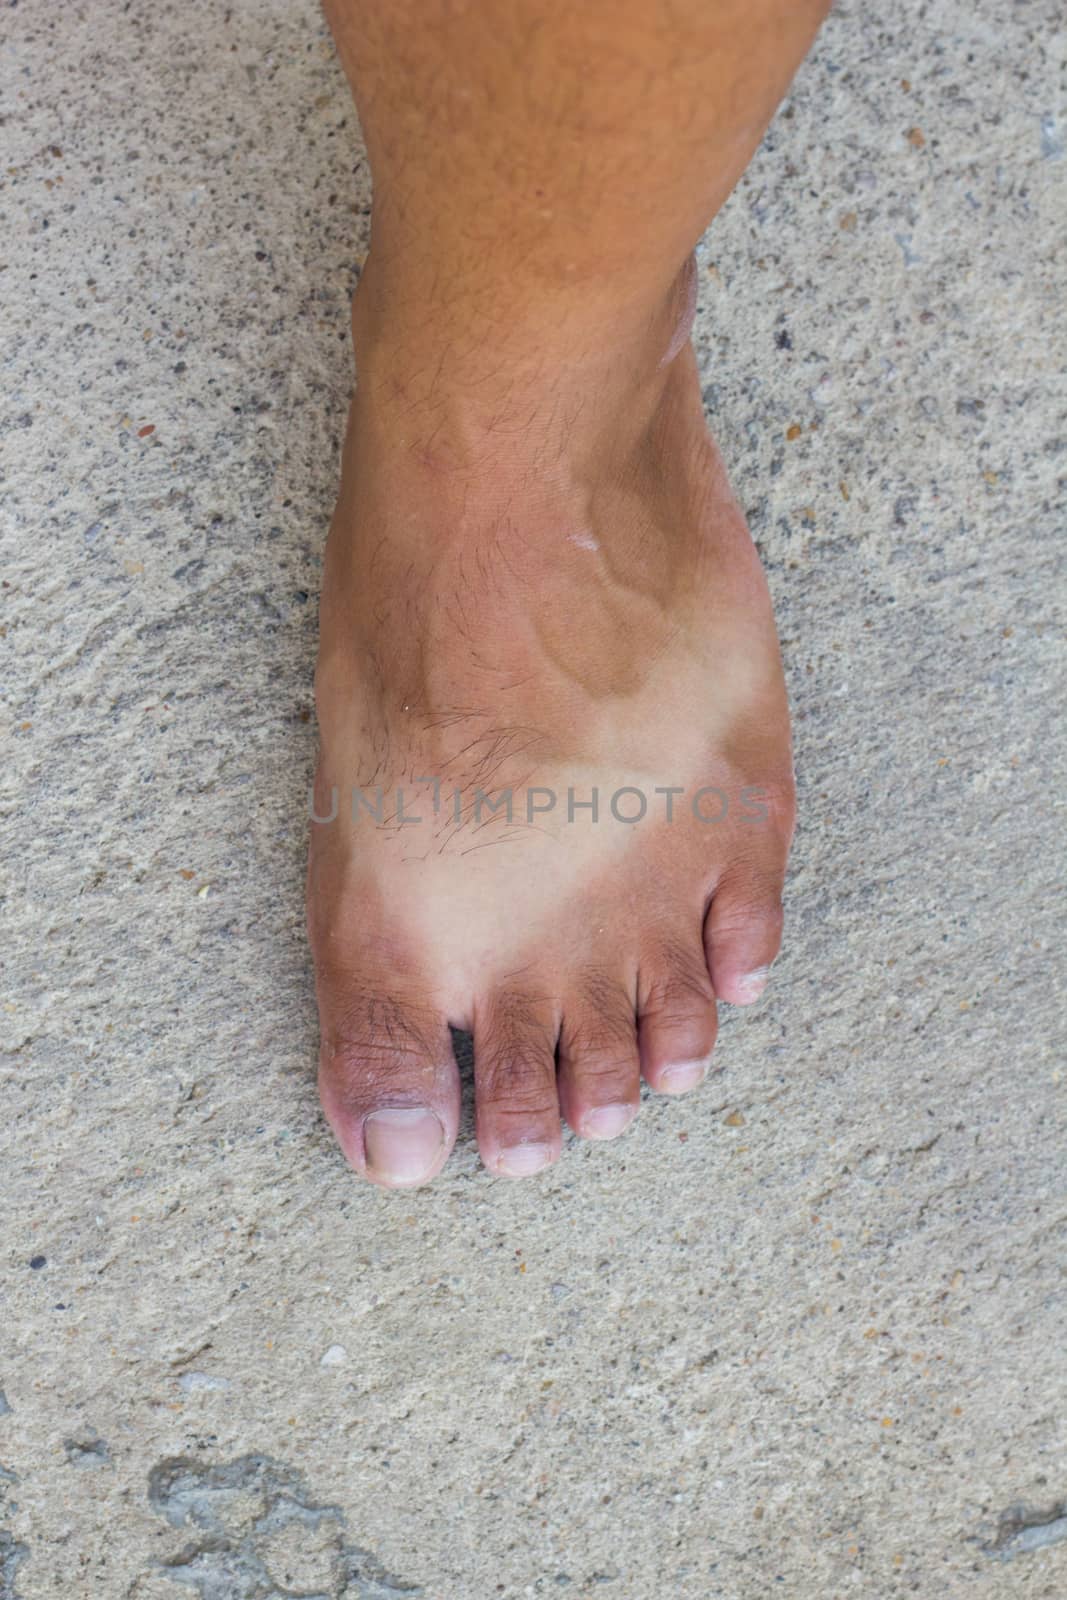 tanned foot when he wears sandal in sunshine for long time by a3701027